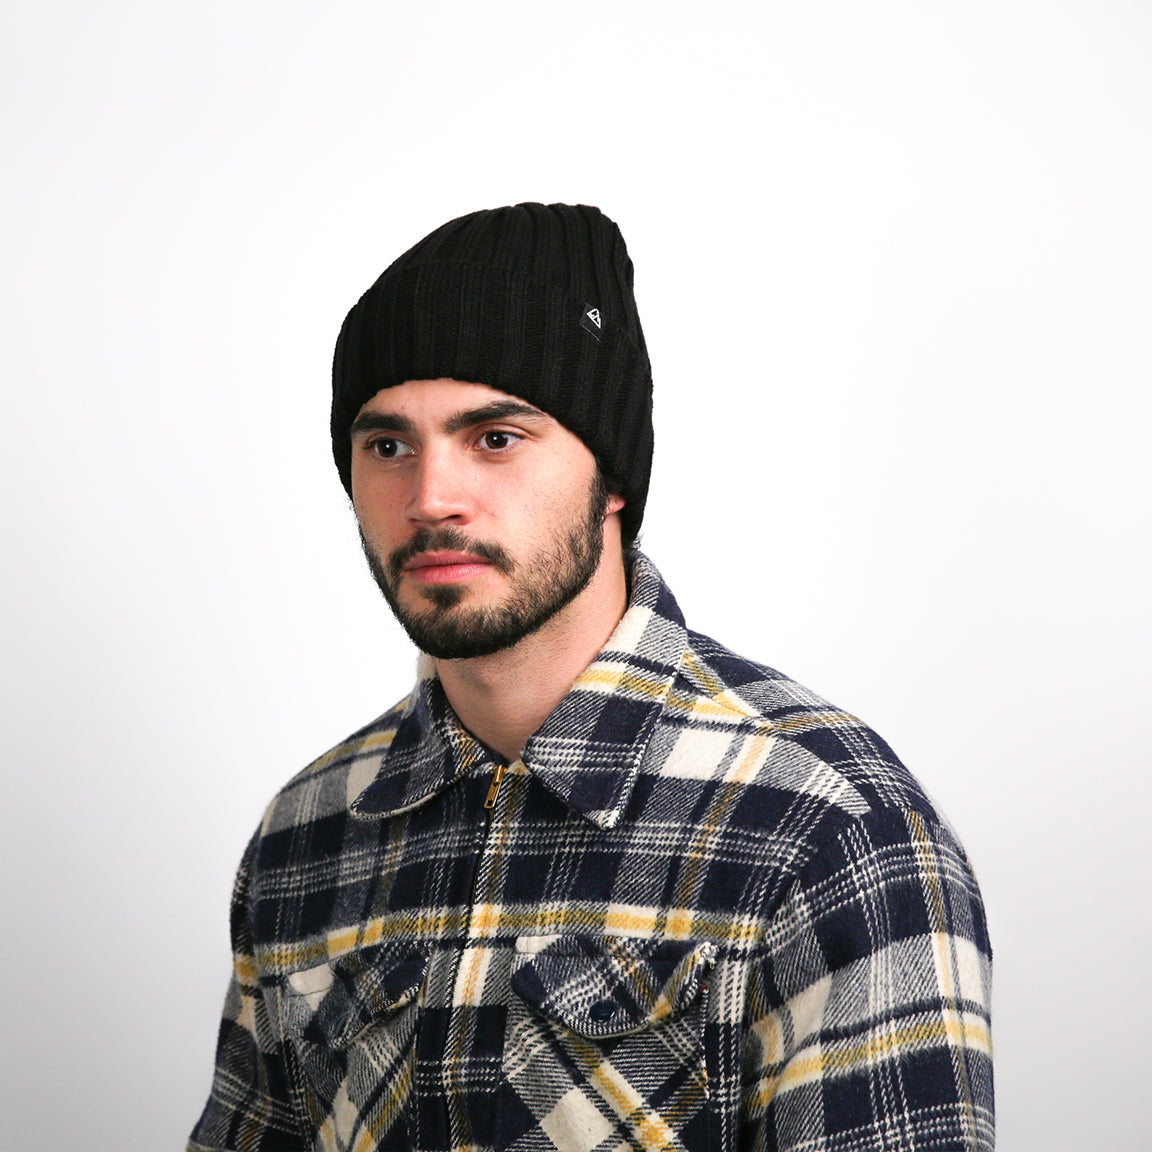 A person is shown wearing a ribbed, black beanie that fits snugly around the head. The beanie has a textured pattern, with a small, black triangular logo on the fold near the forehead. The person is also wearing a plaid shirt with navy blue, white, and yellow checks